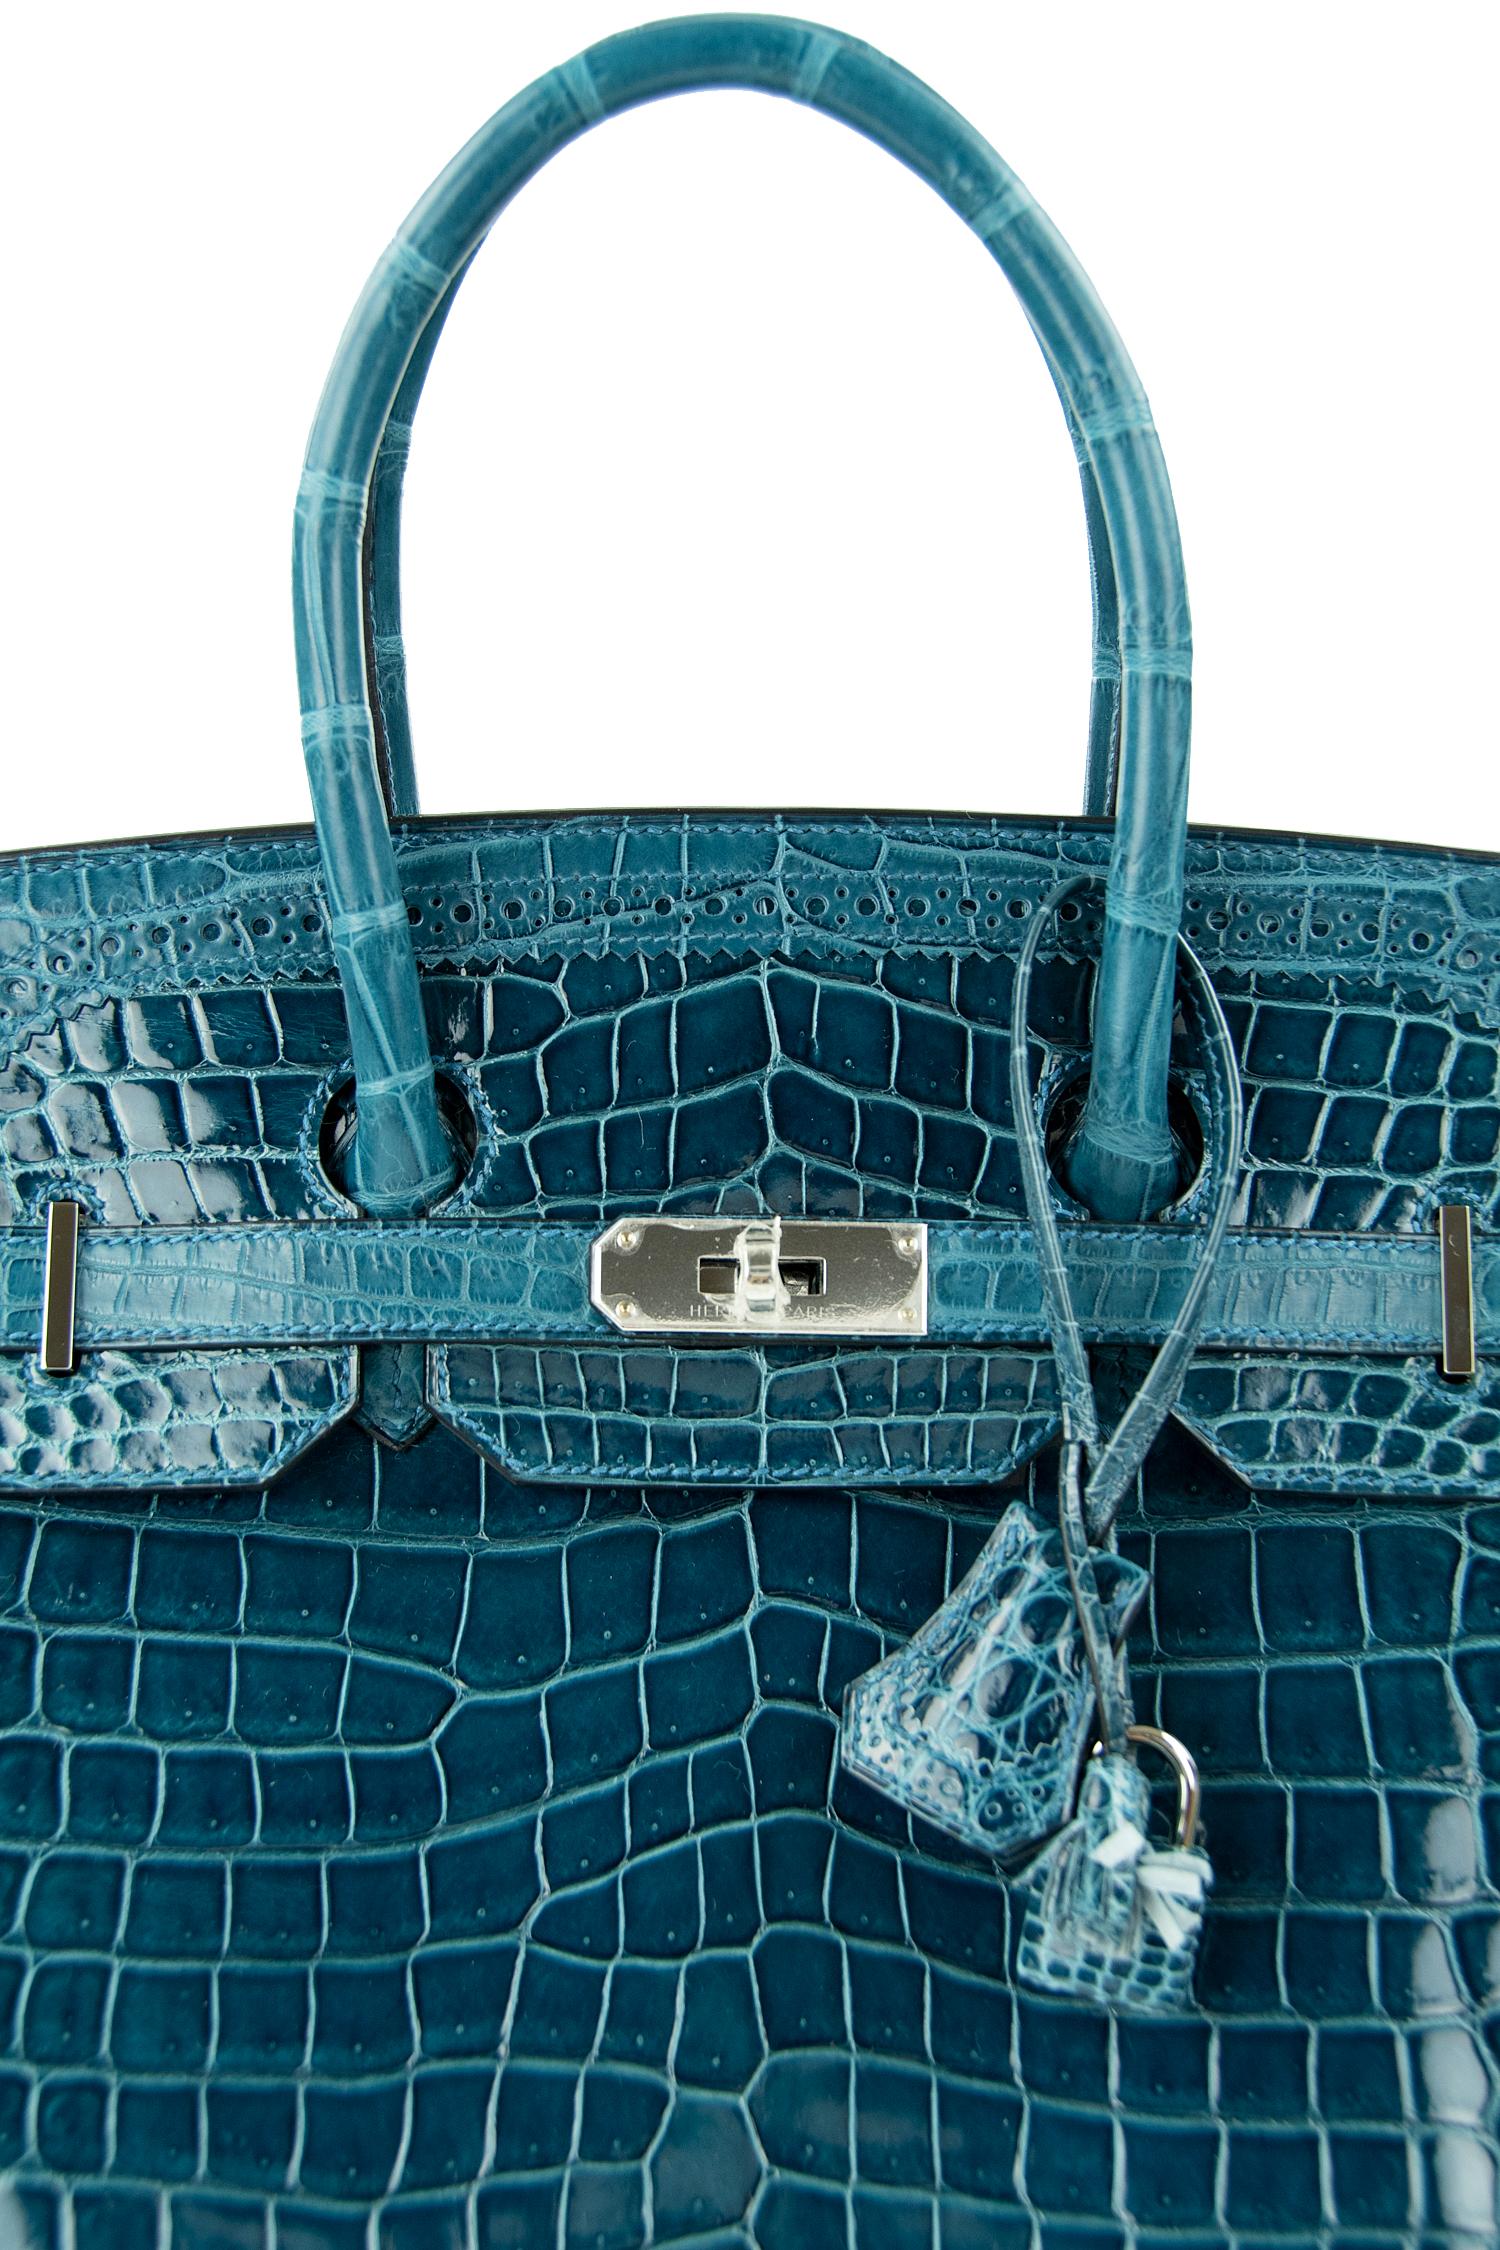 Limited Edition Hermes Birkin Ghillies Bag 35cm Shiny and Matte Bleu Colvert PHW In Excellent Condition For Sale In Newport, RI